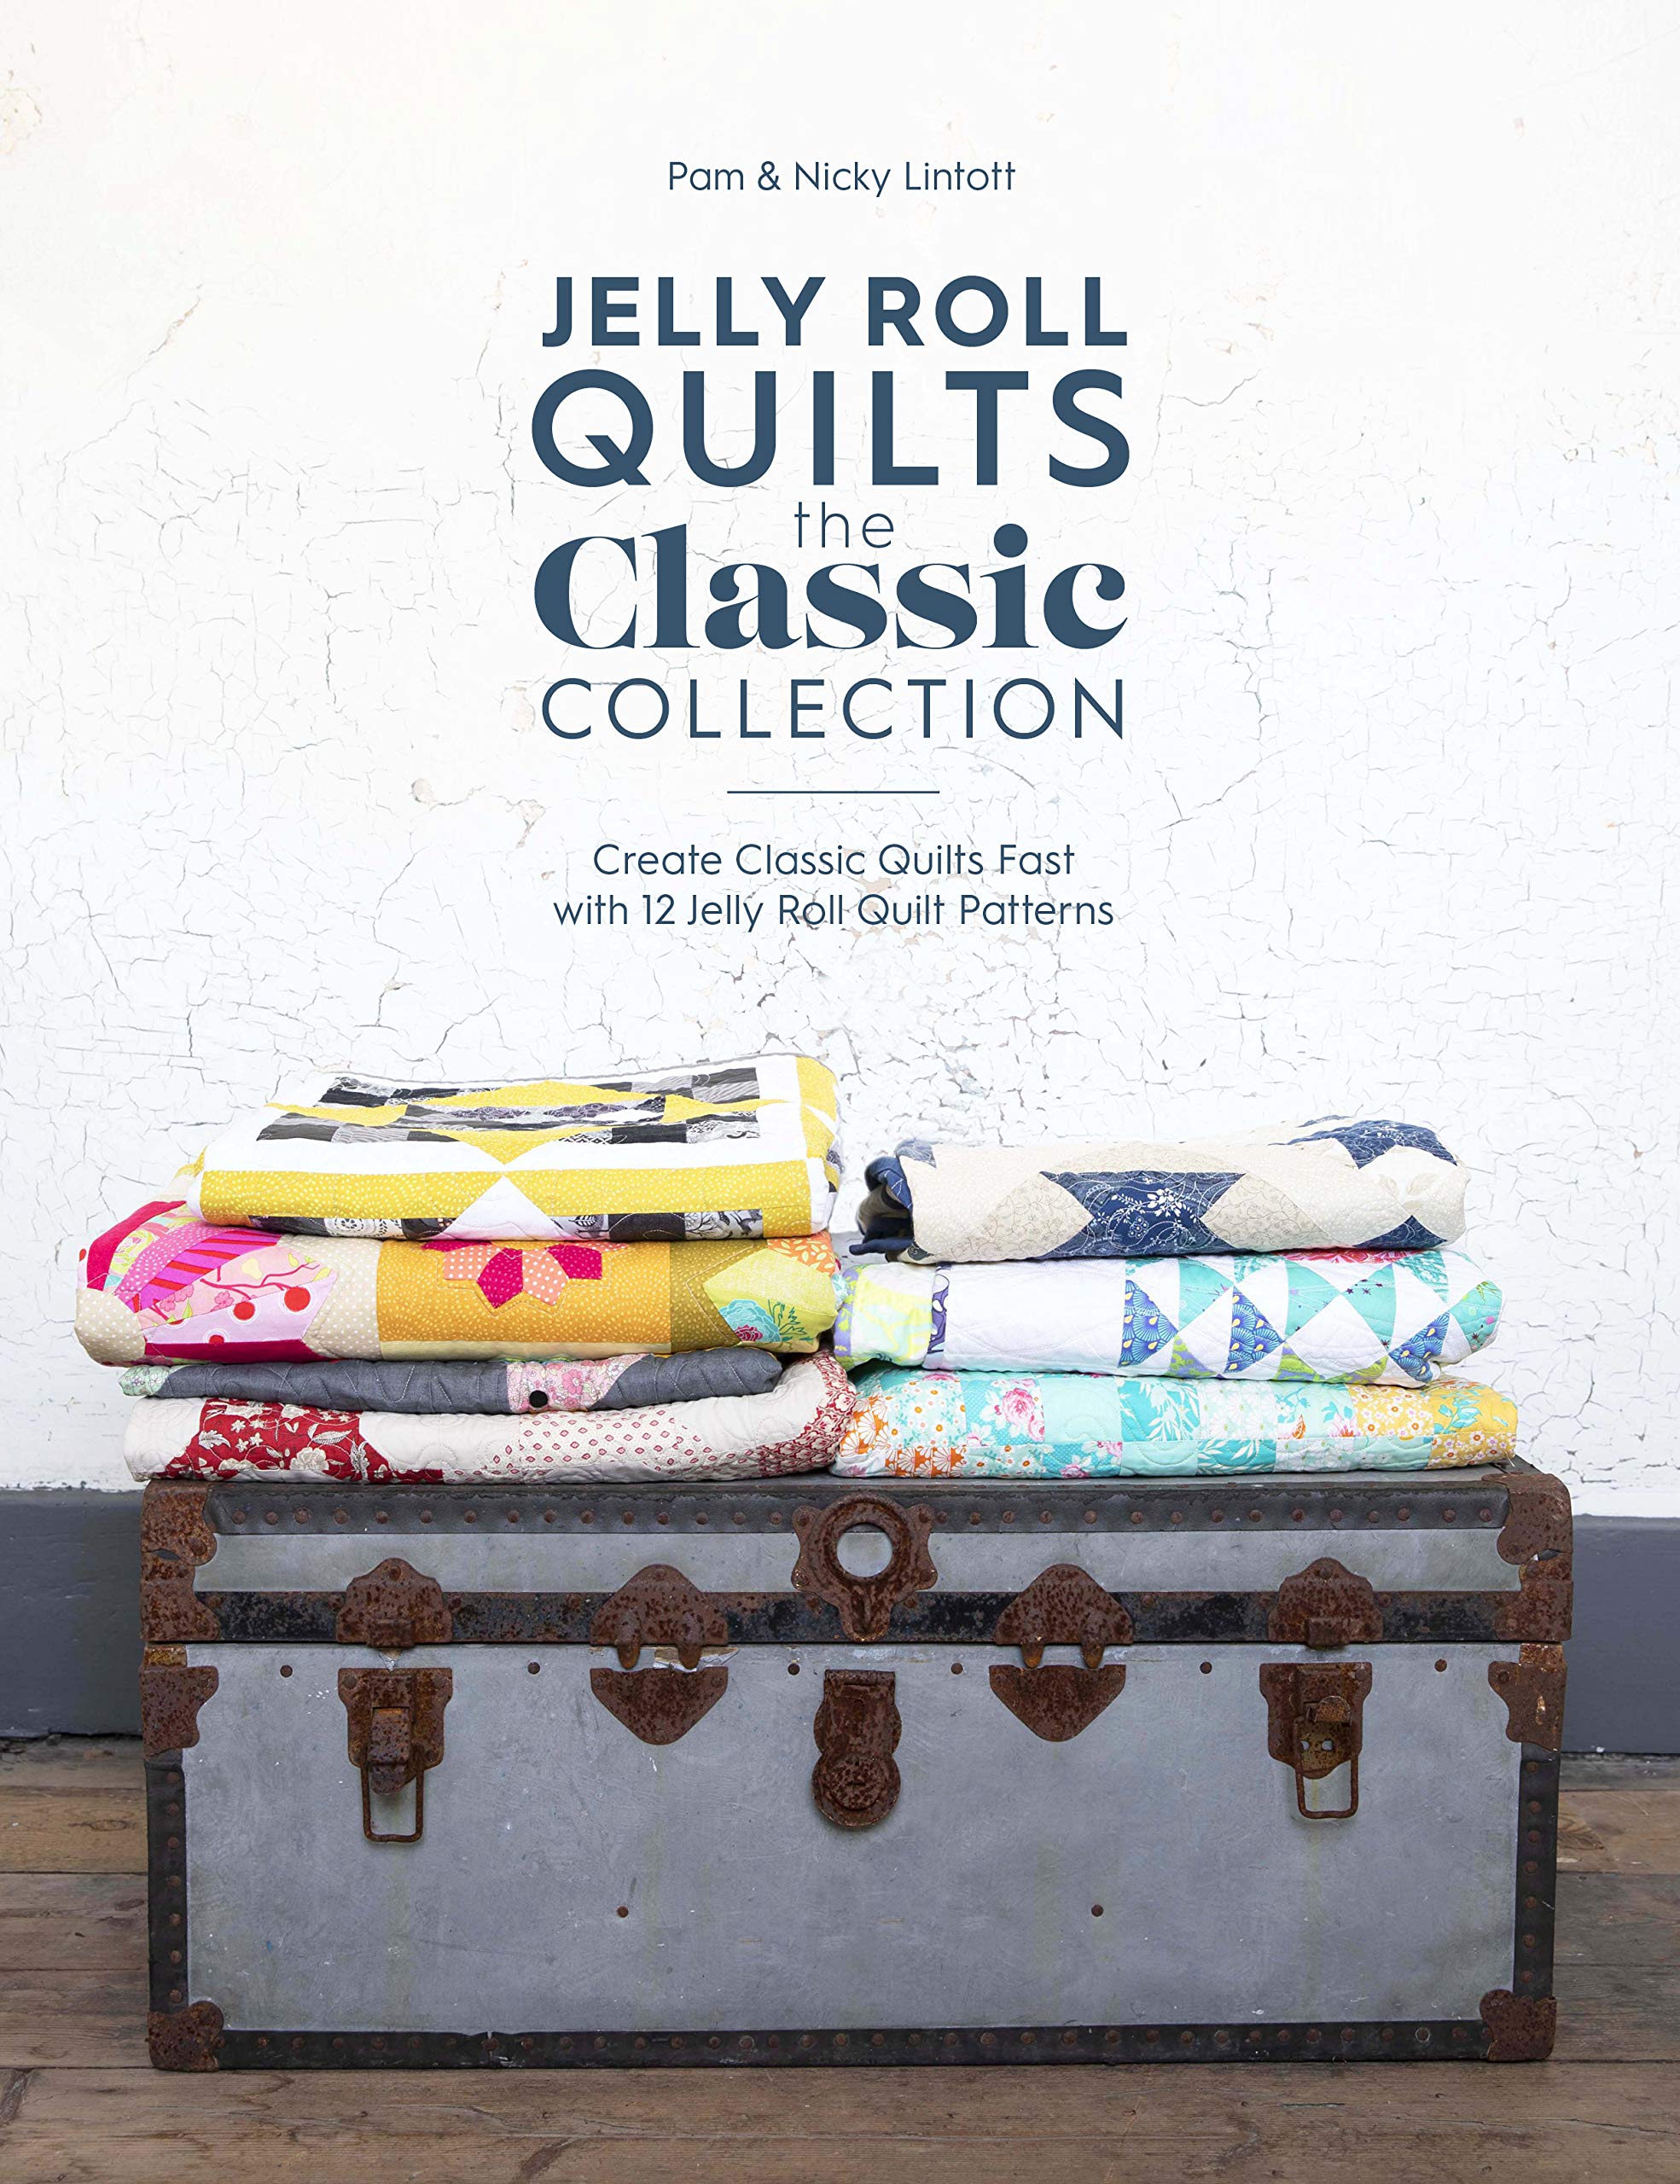 Jelly Roll Quilts The Classic Collection by Pam & Nicky Lintott